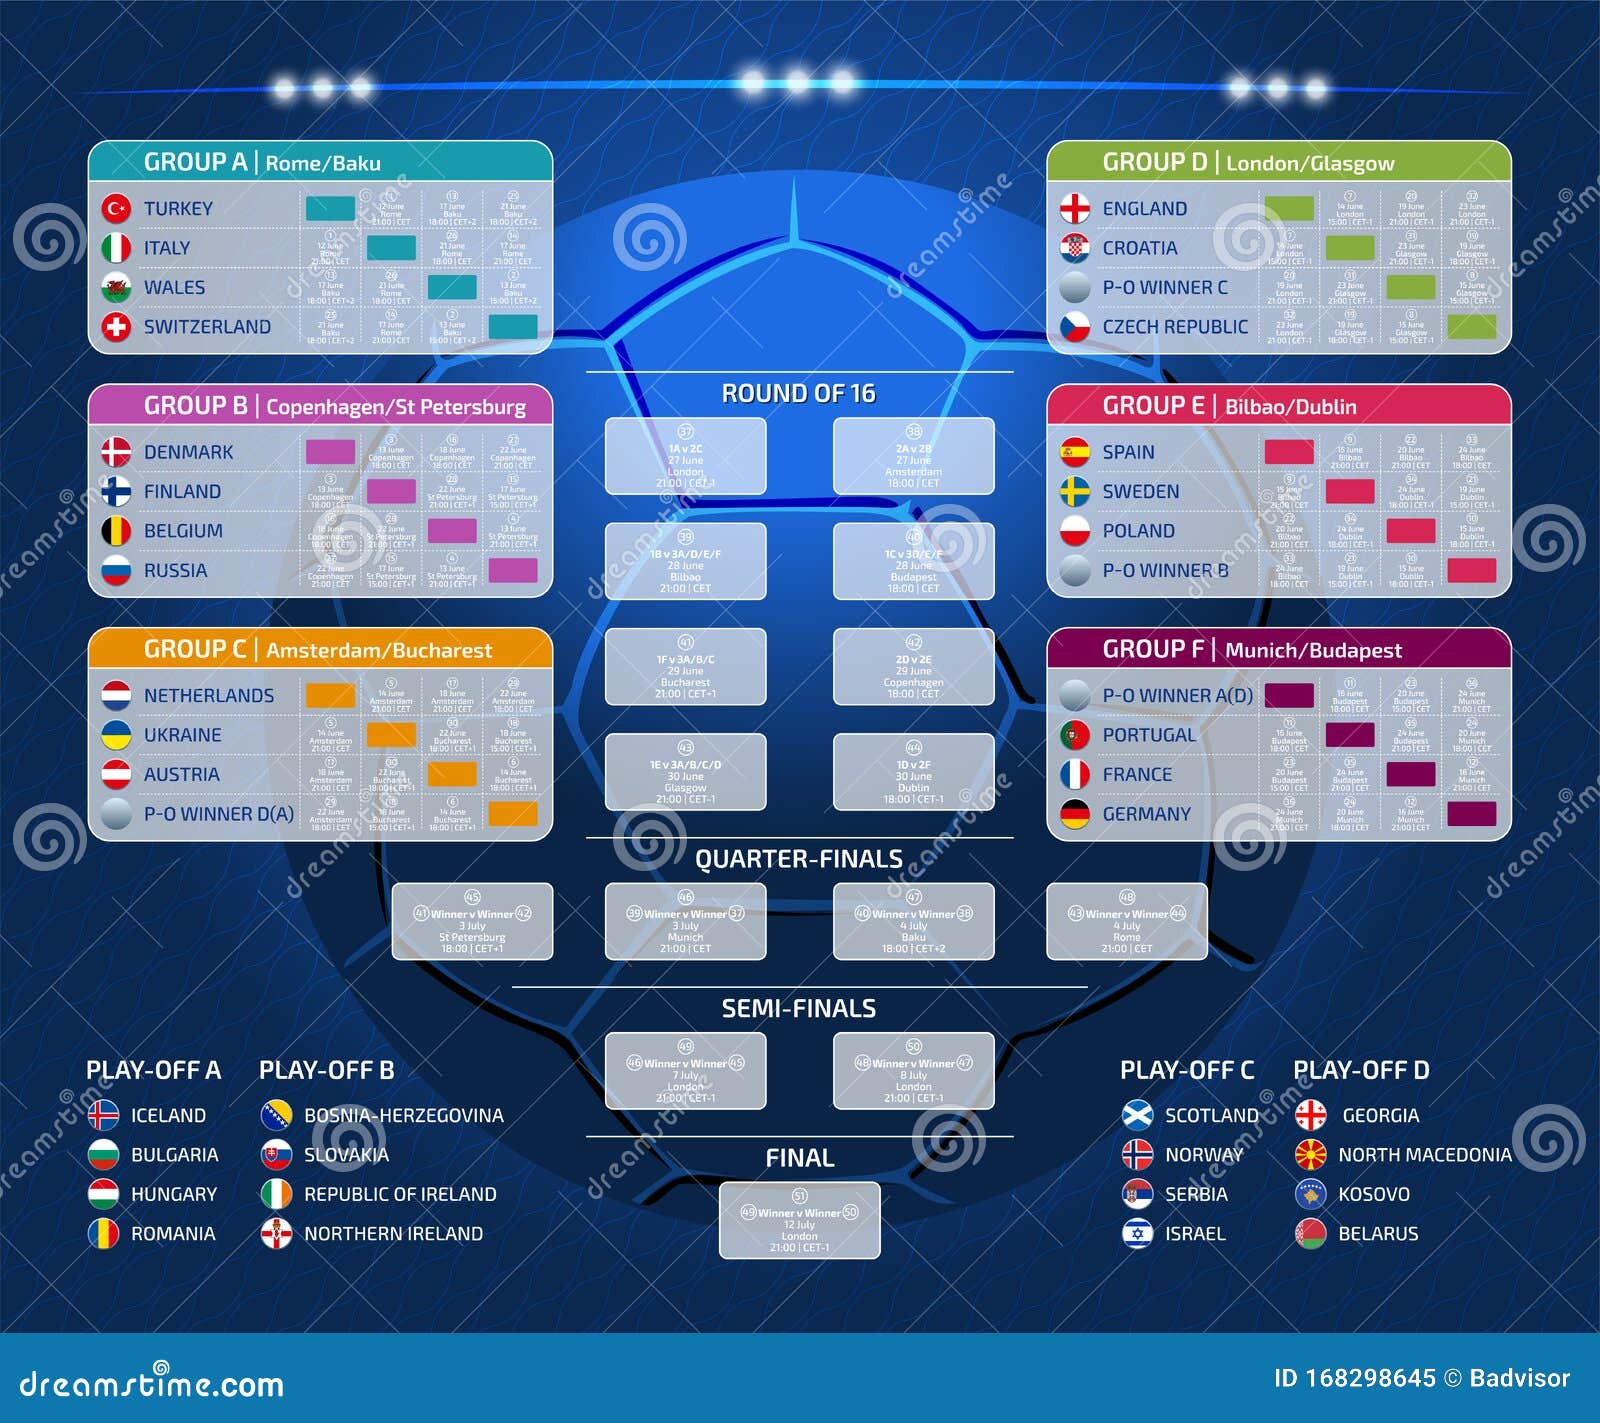 Match Schedule, Template for Web, Print, Football Results Table, Vector Illustration Editorial Image